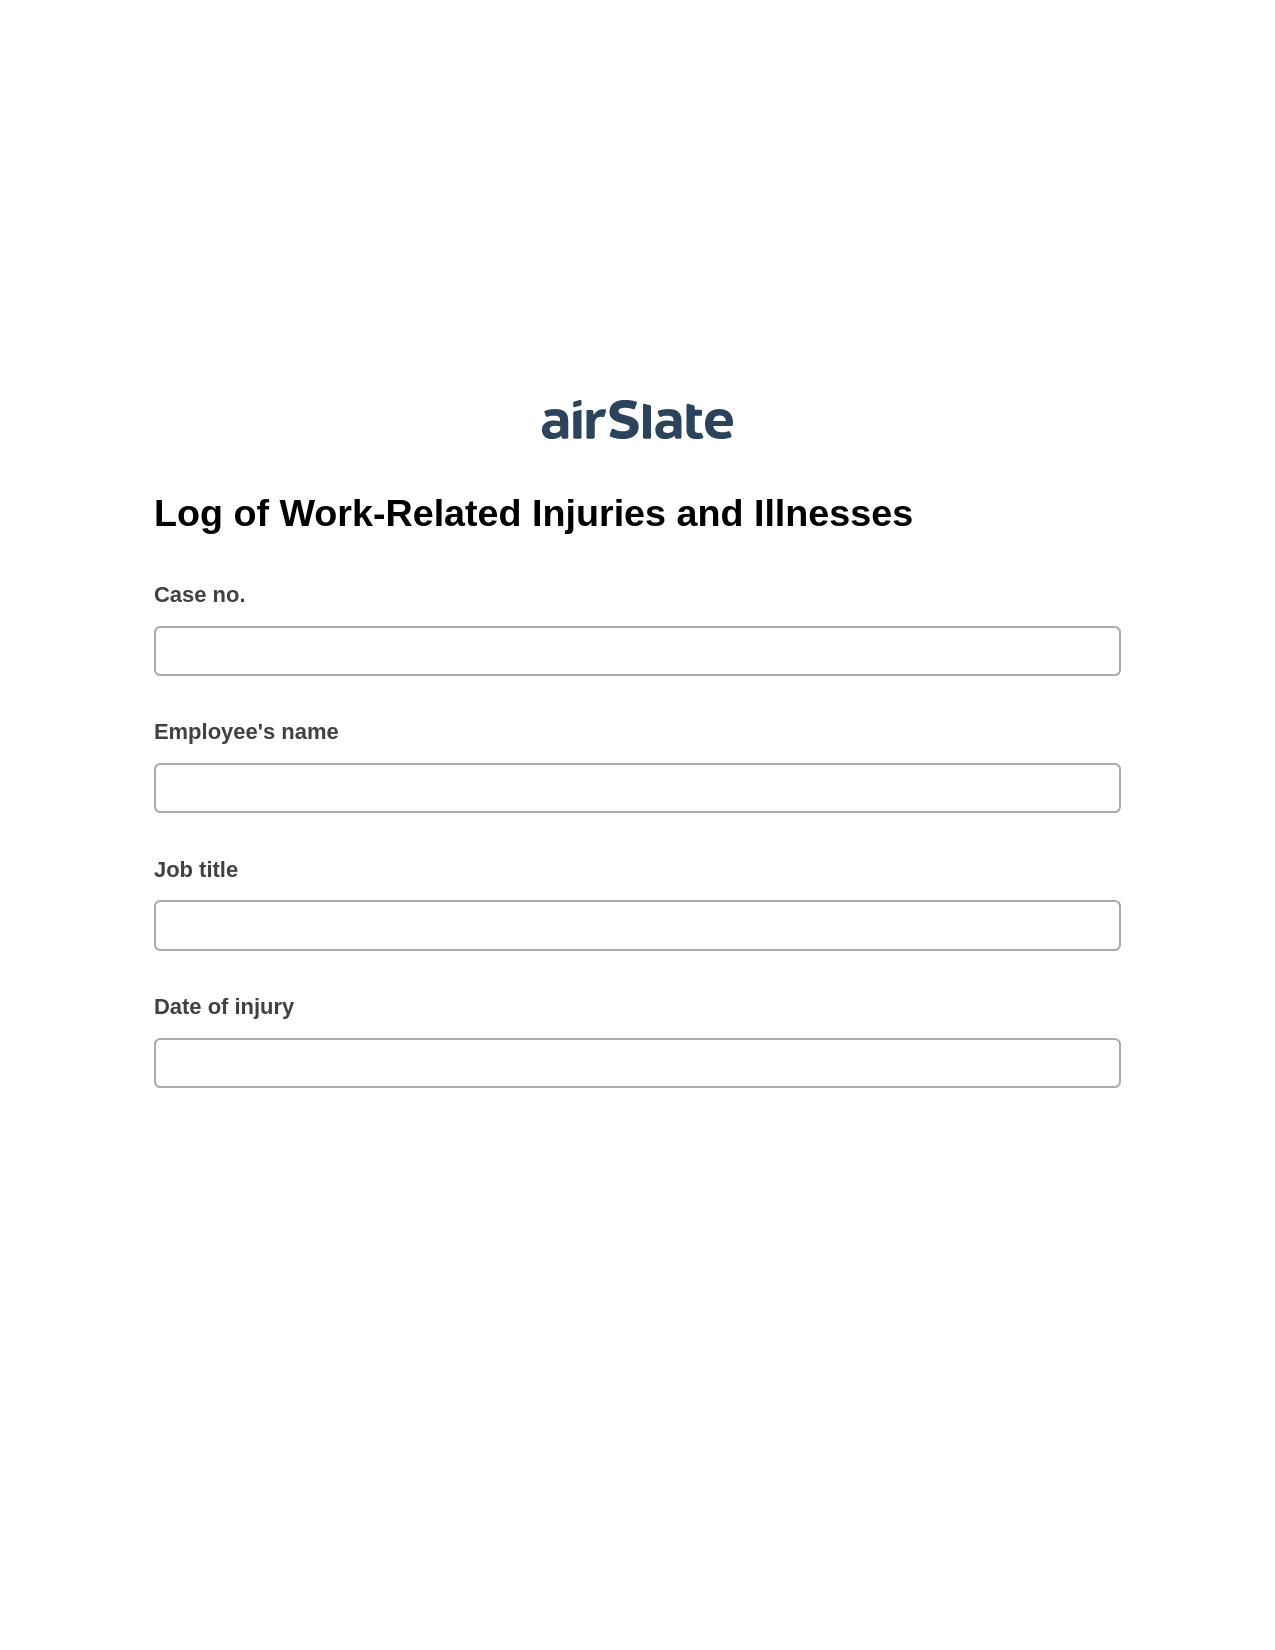 Log of Work-Related Injuries and Illnesses Pre-fill from Salesforce Record Bot, Google Calendar Bot, Export to Google Sheet Bot